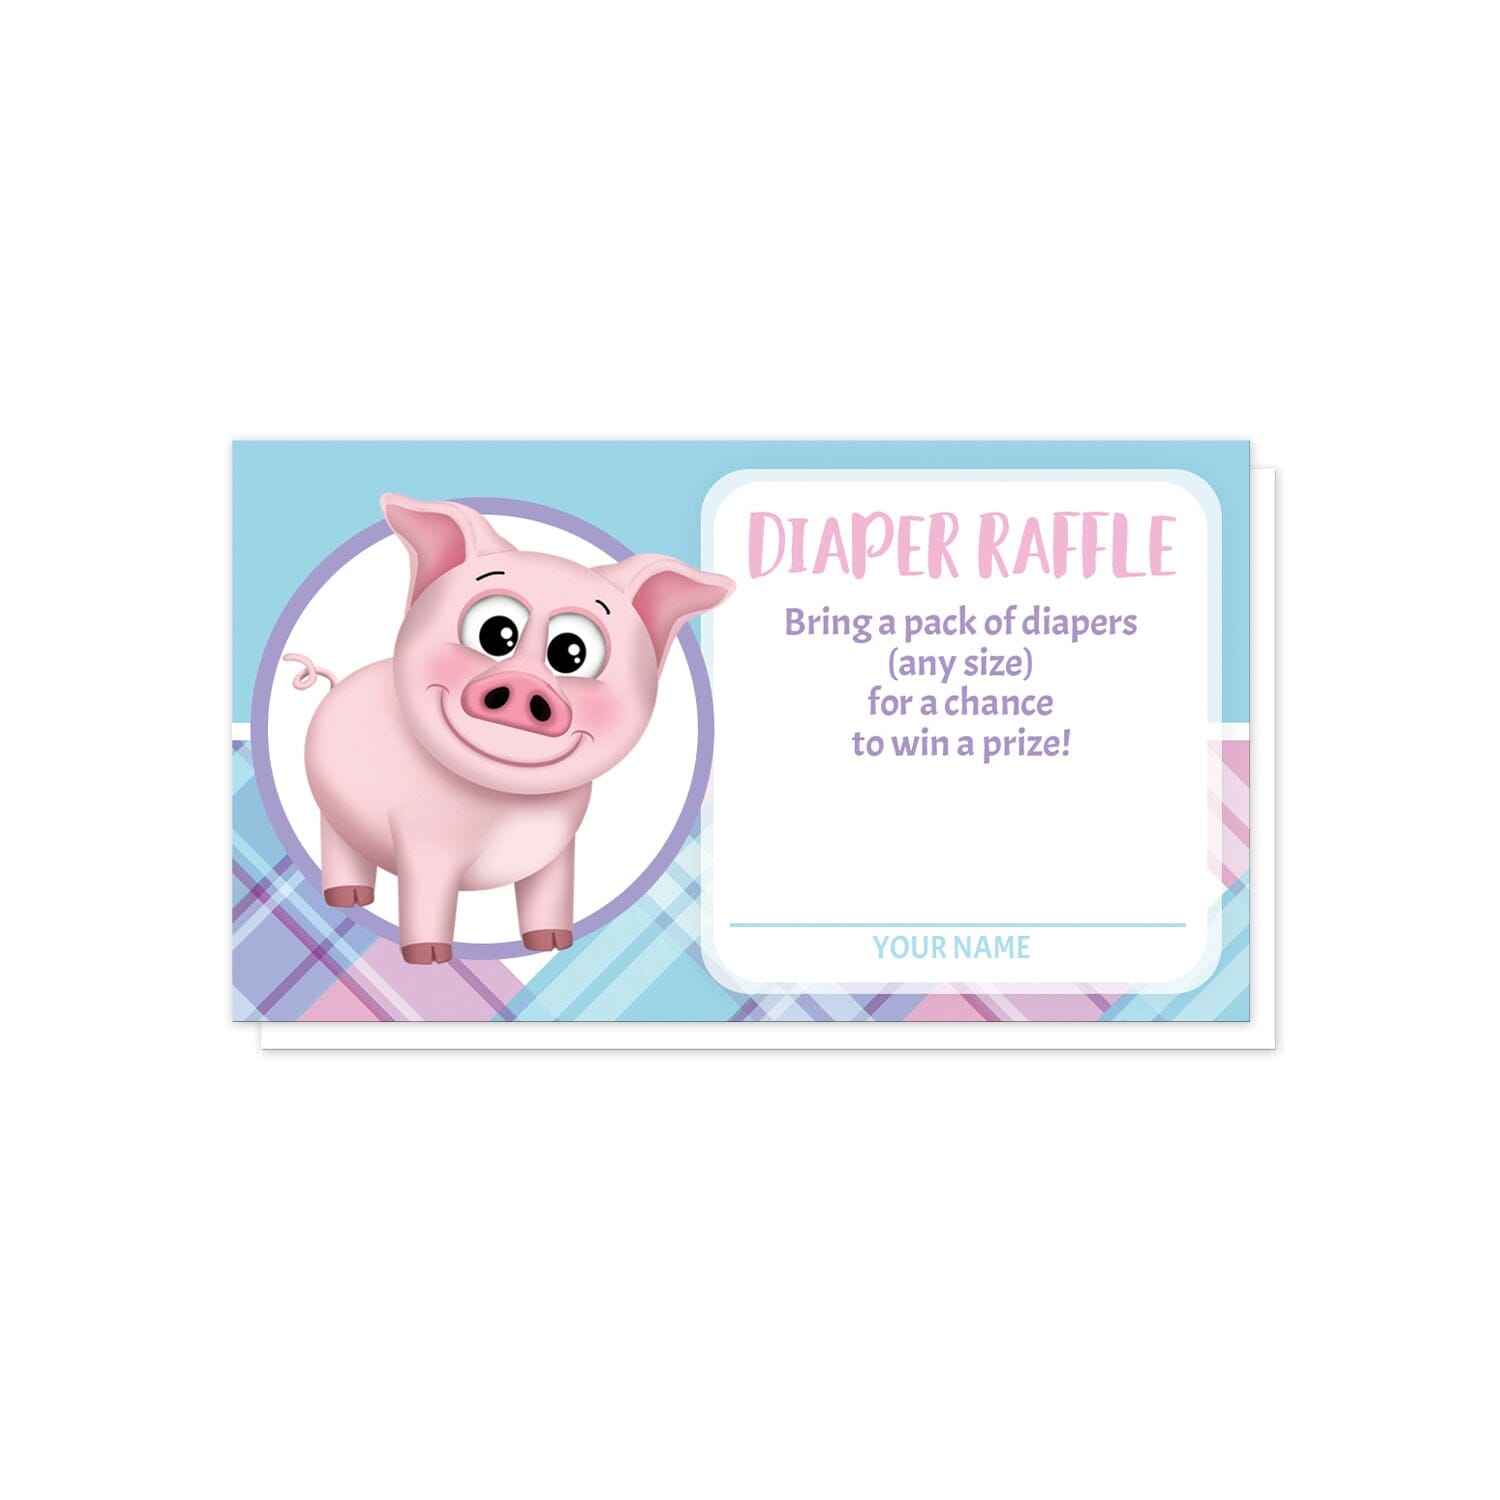 Happy Pig Pink Blue and Purple Plaid Diaper Raffle Cards at Artistically Invited. Adorable happy pig pink blue and purple plaid diaper raffle cards illustrated with a cute and happy pink pig in a white and purple circle on the left side over a blue background along the top, and a pink, blue, and purple plaid pattern background along the bottom. Your diaper raffle details are printed in pink and purple in a white rectangular area over the background design on the right side.